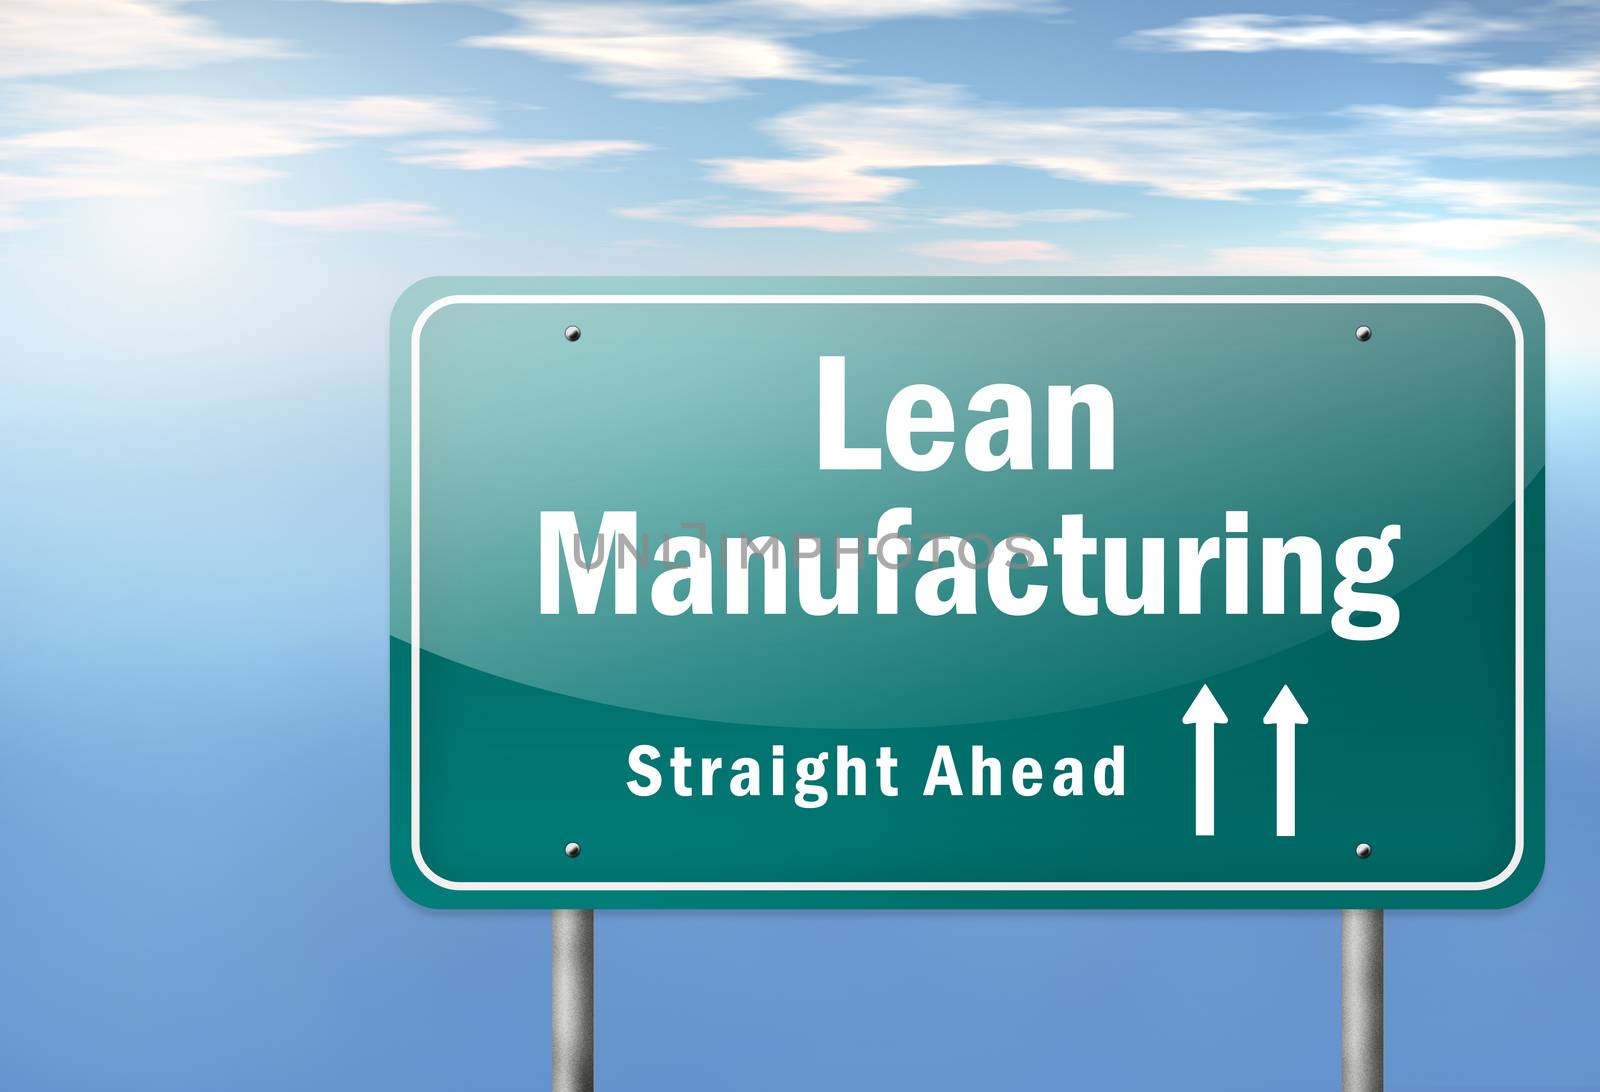 Highway Signpost "Lean Manufacturing" by mindscanner